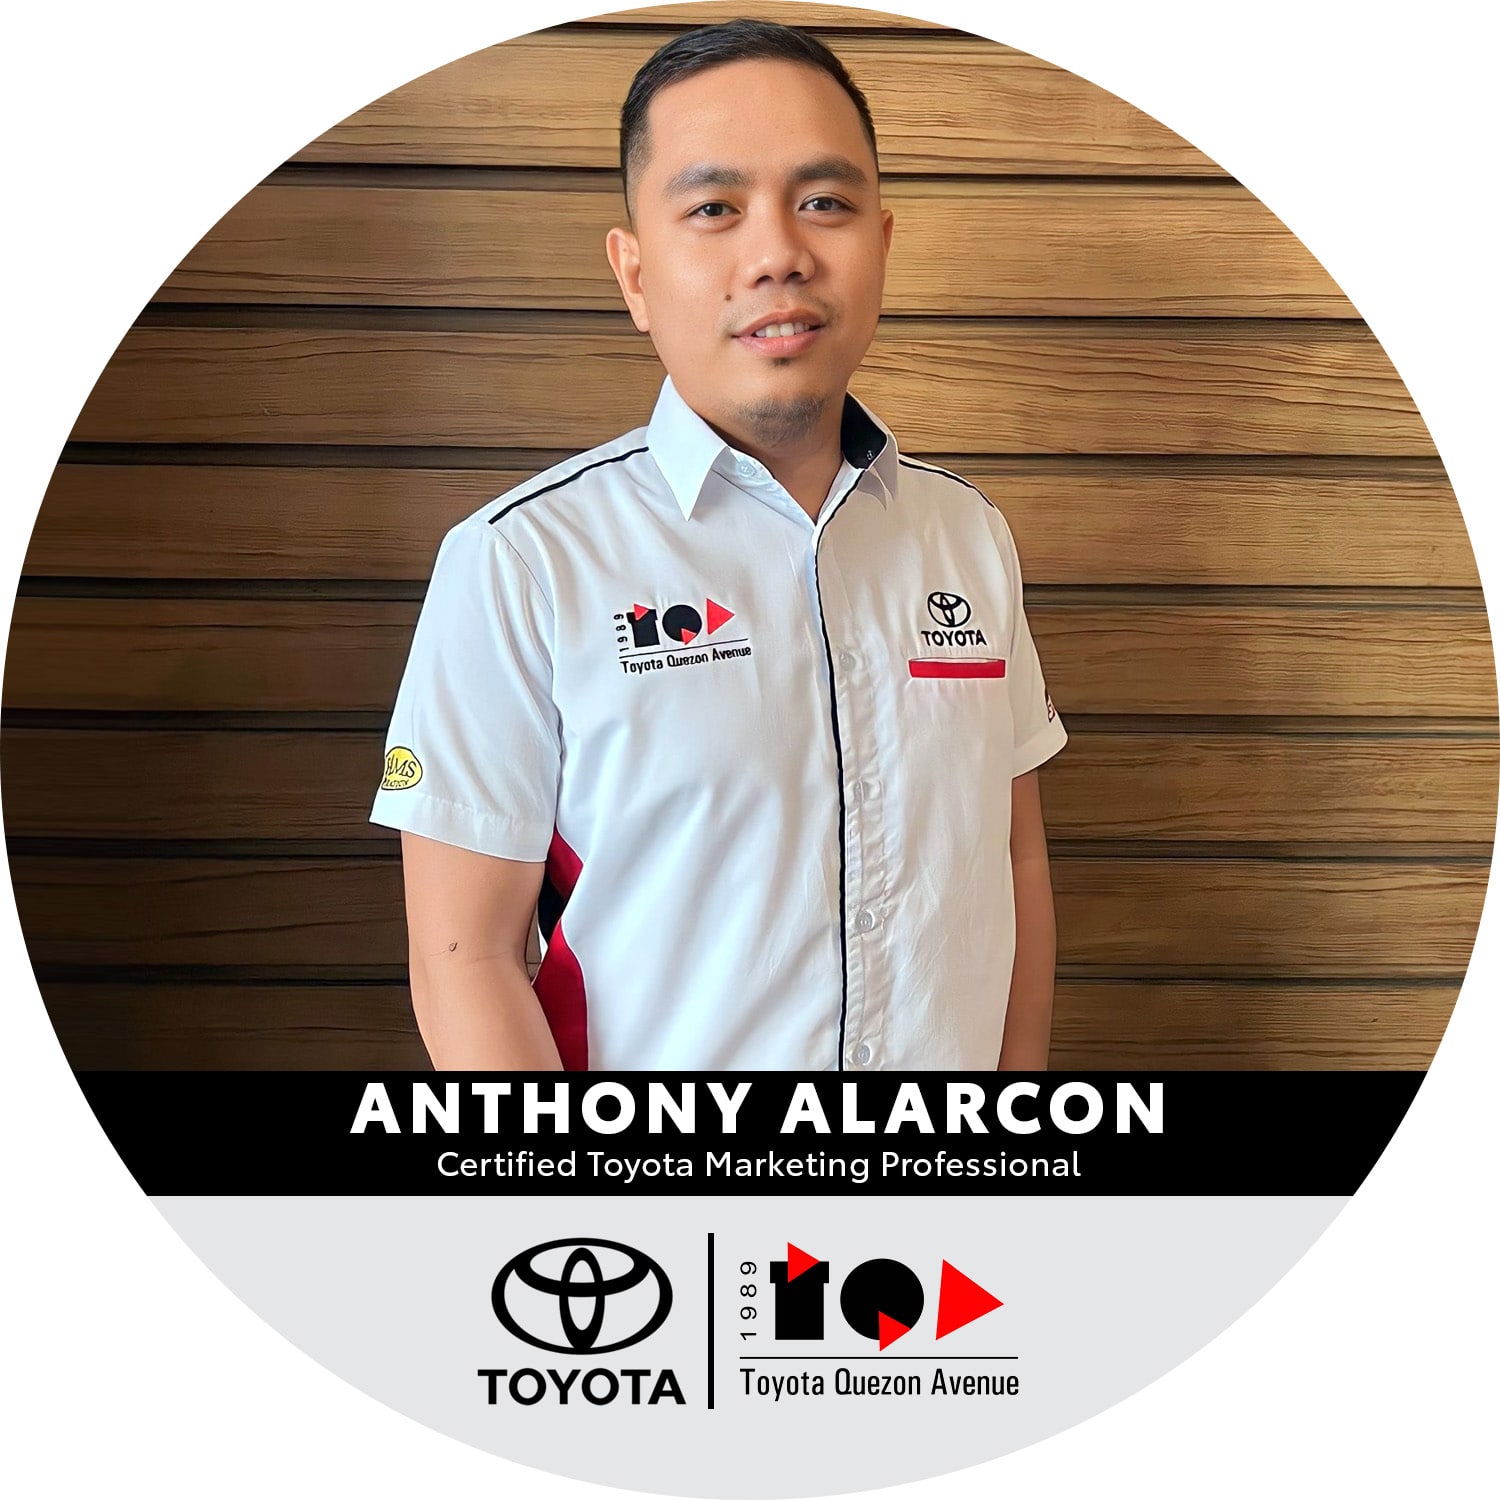 Certified Toyota Marketing Professionals - Anthony Alarcon